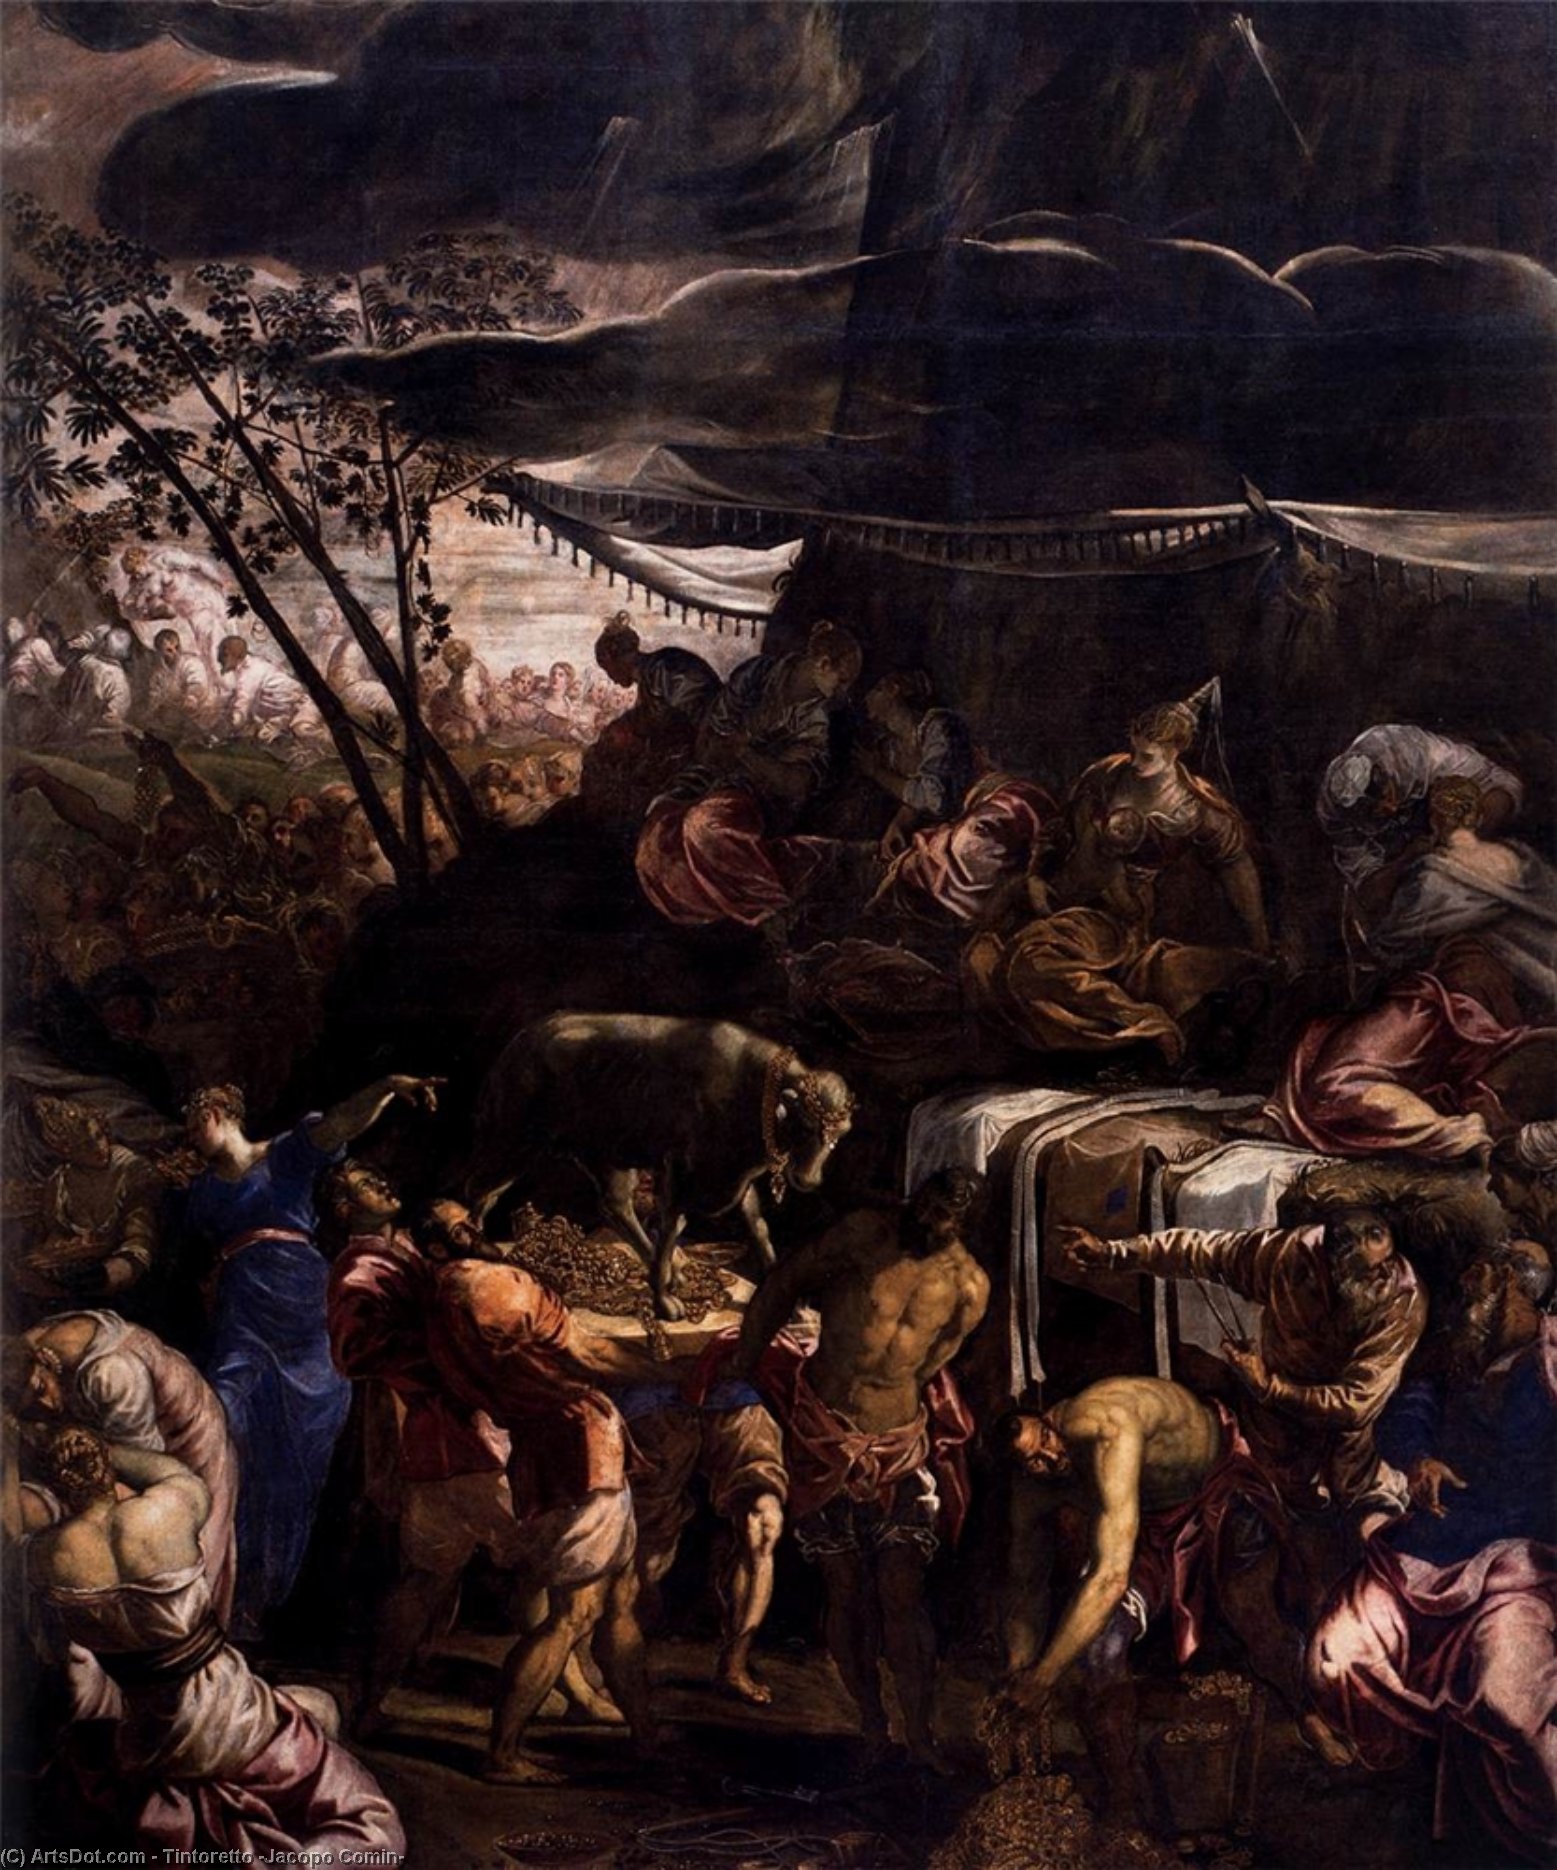 WikiOO.org - Encyclopedia of Fine Arts - Festés, Grafika Tintoretto (Jacopo Comin) - Moses Receiving the Tables of the Law (detail)